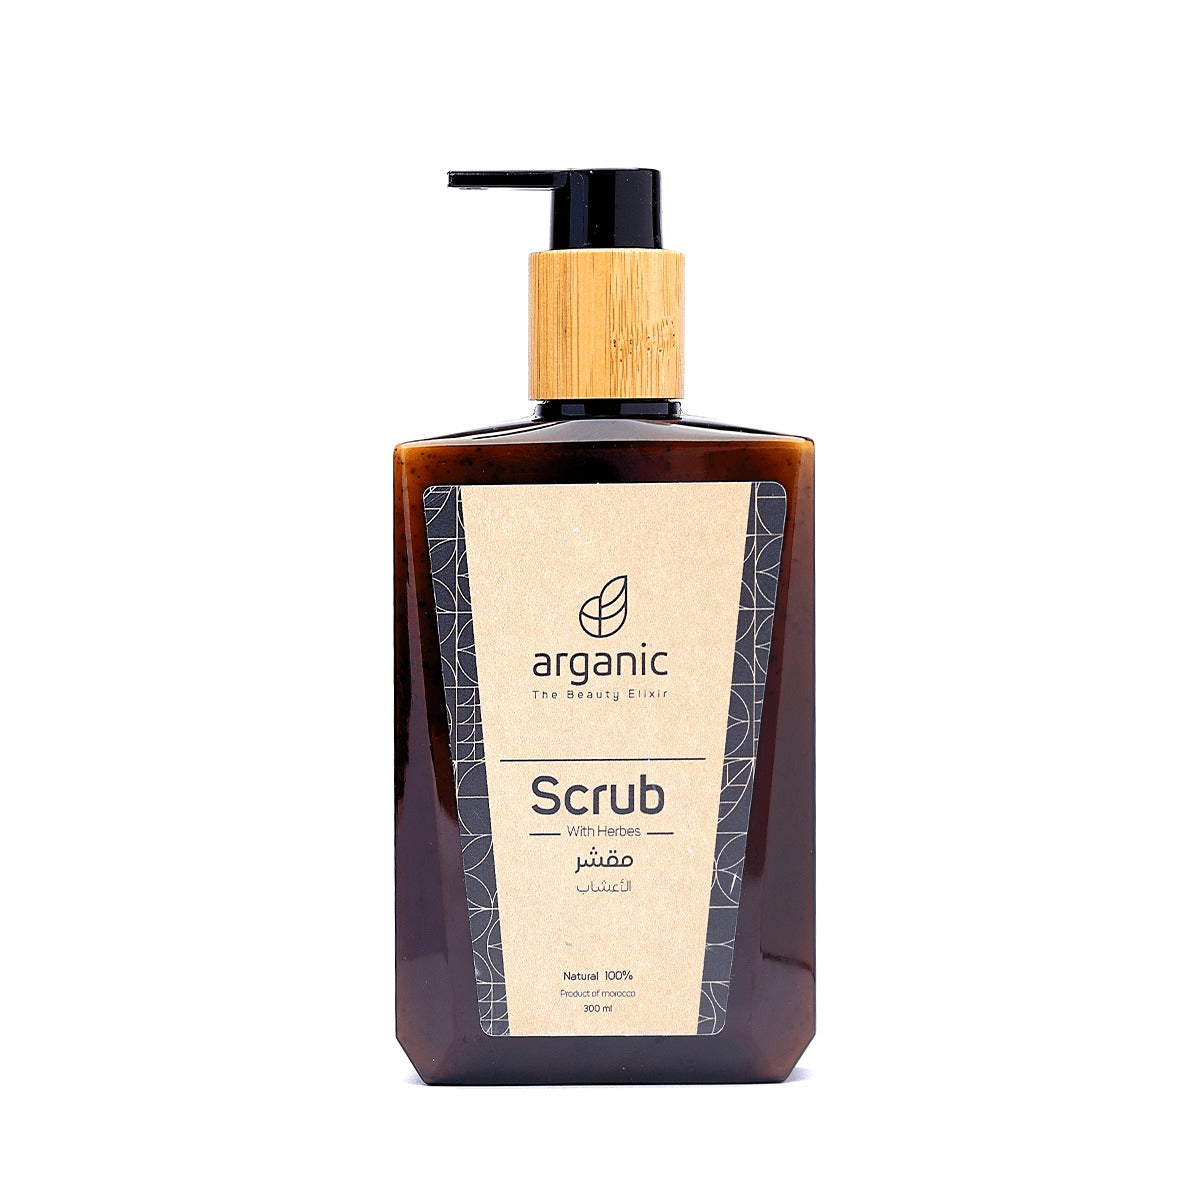 Herbal scrub in brown bottle with pump for exfoliation.